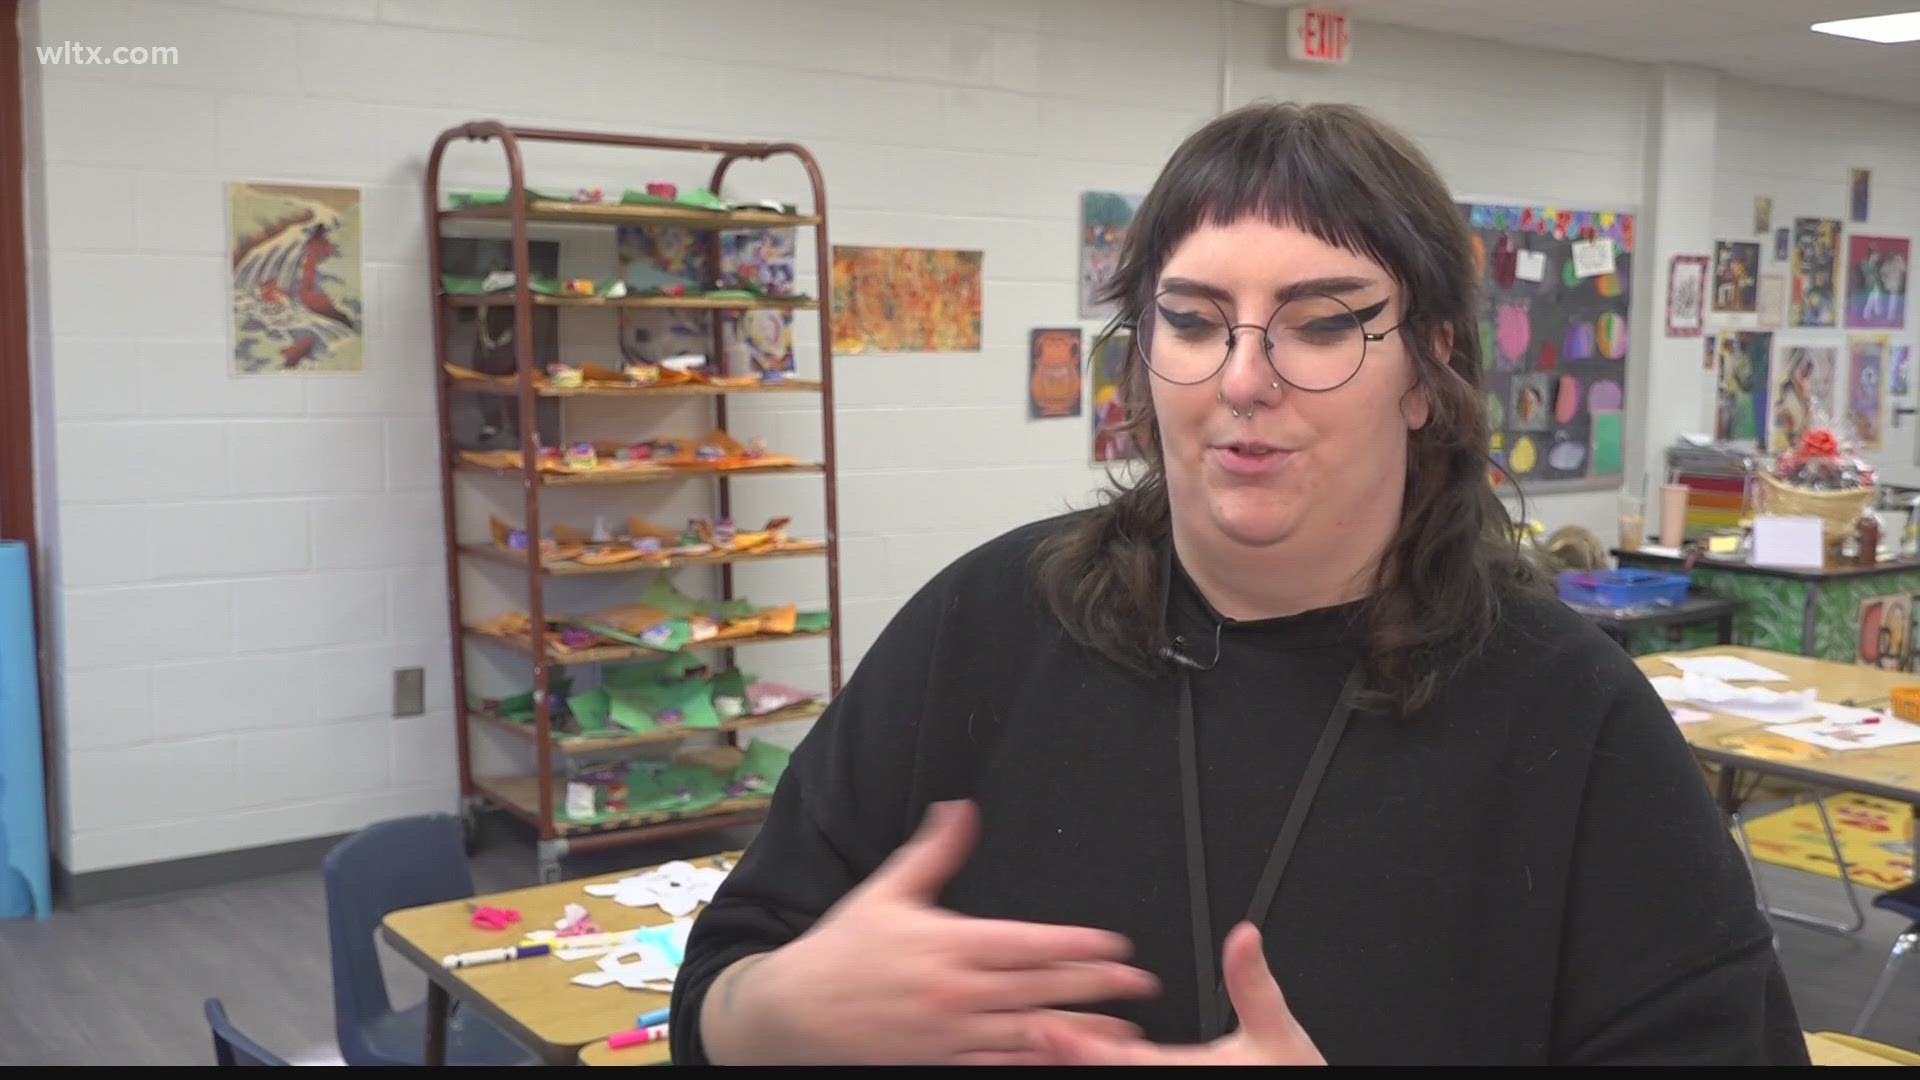 Livi Crowell is an art teacher at Batesburg-Leesville primary and she's making her students excited to learn more and have fun with art.